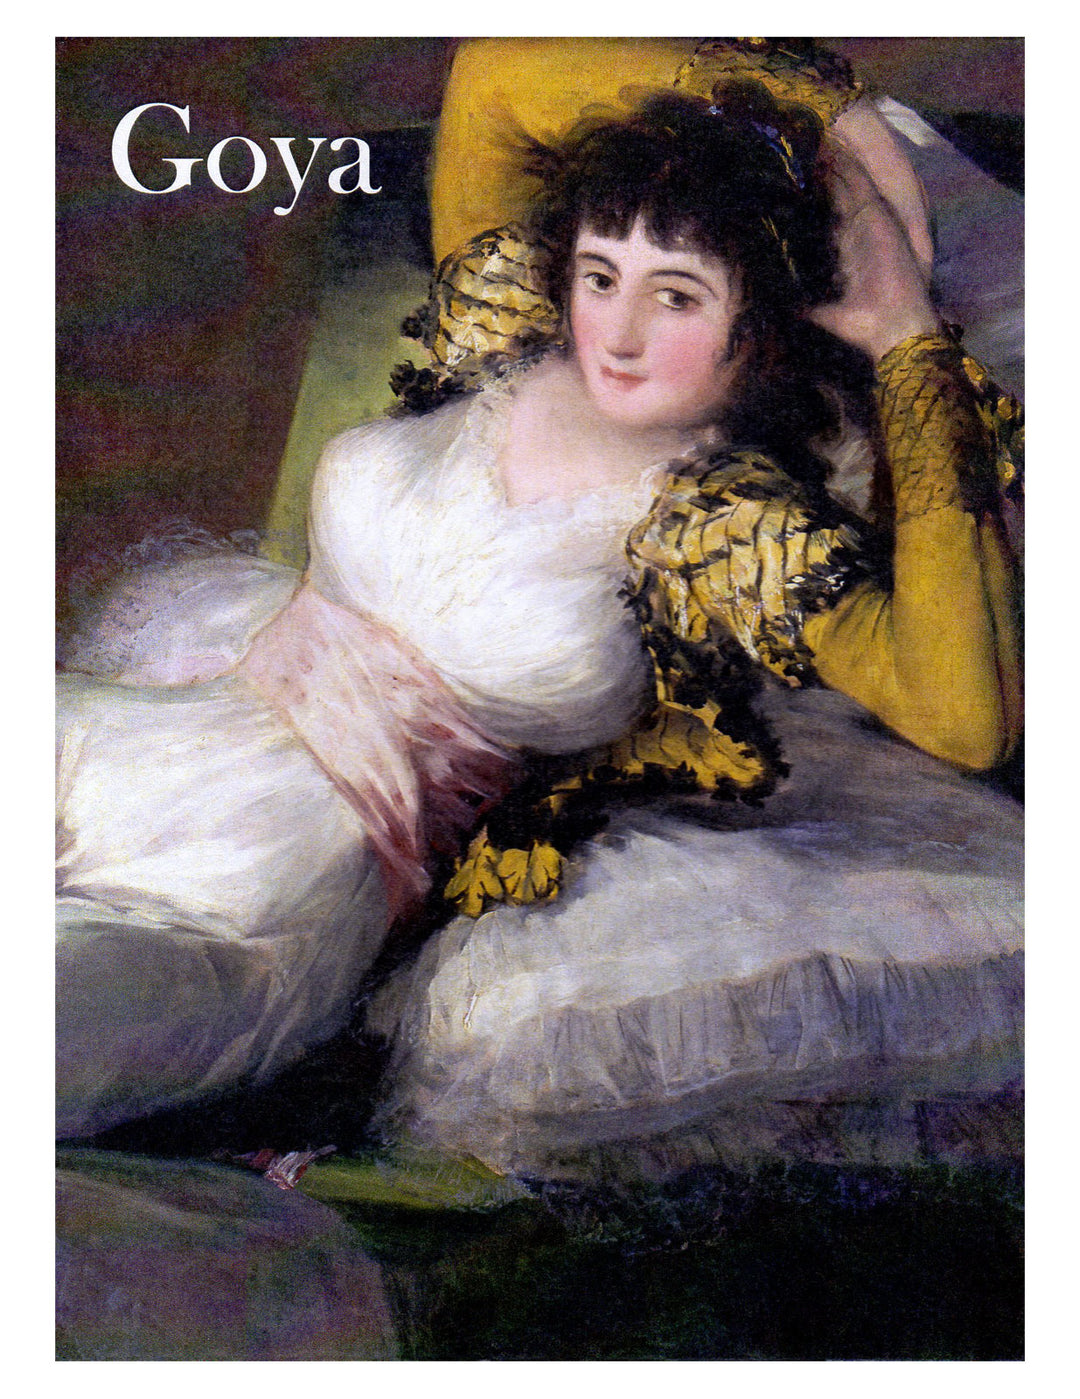 Francisco Goya Note Cards - Boxed Set of 16 Note Cards with Envelopes